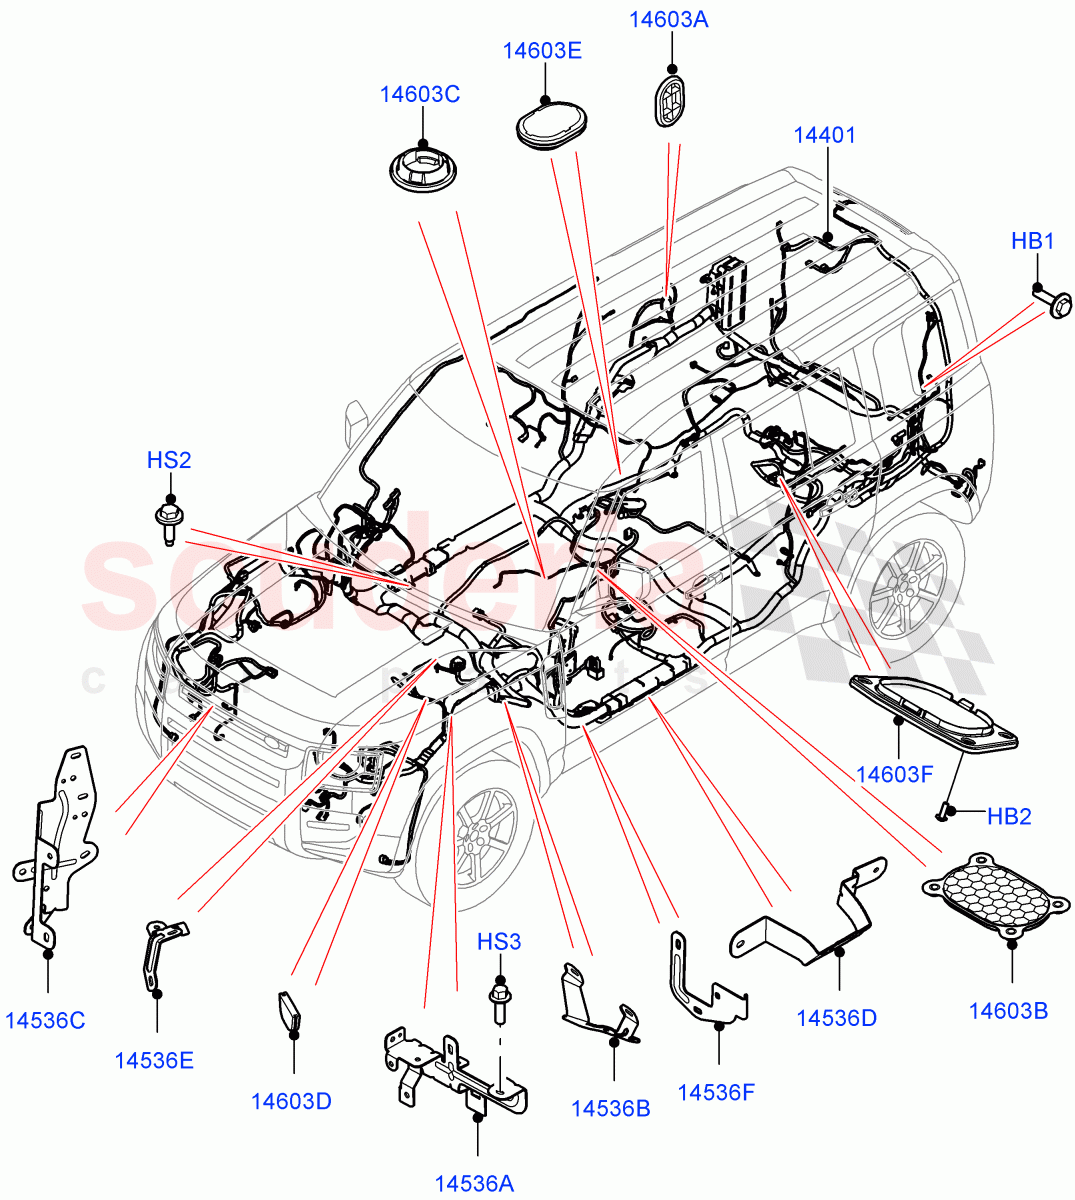 Electrical Wiring - Engine And Dash(Main Harness) of Land Rover Land Rover Defender (2020+) [5.0 OHC SGDI SC V8 Petrol]